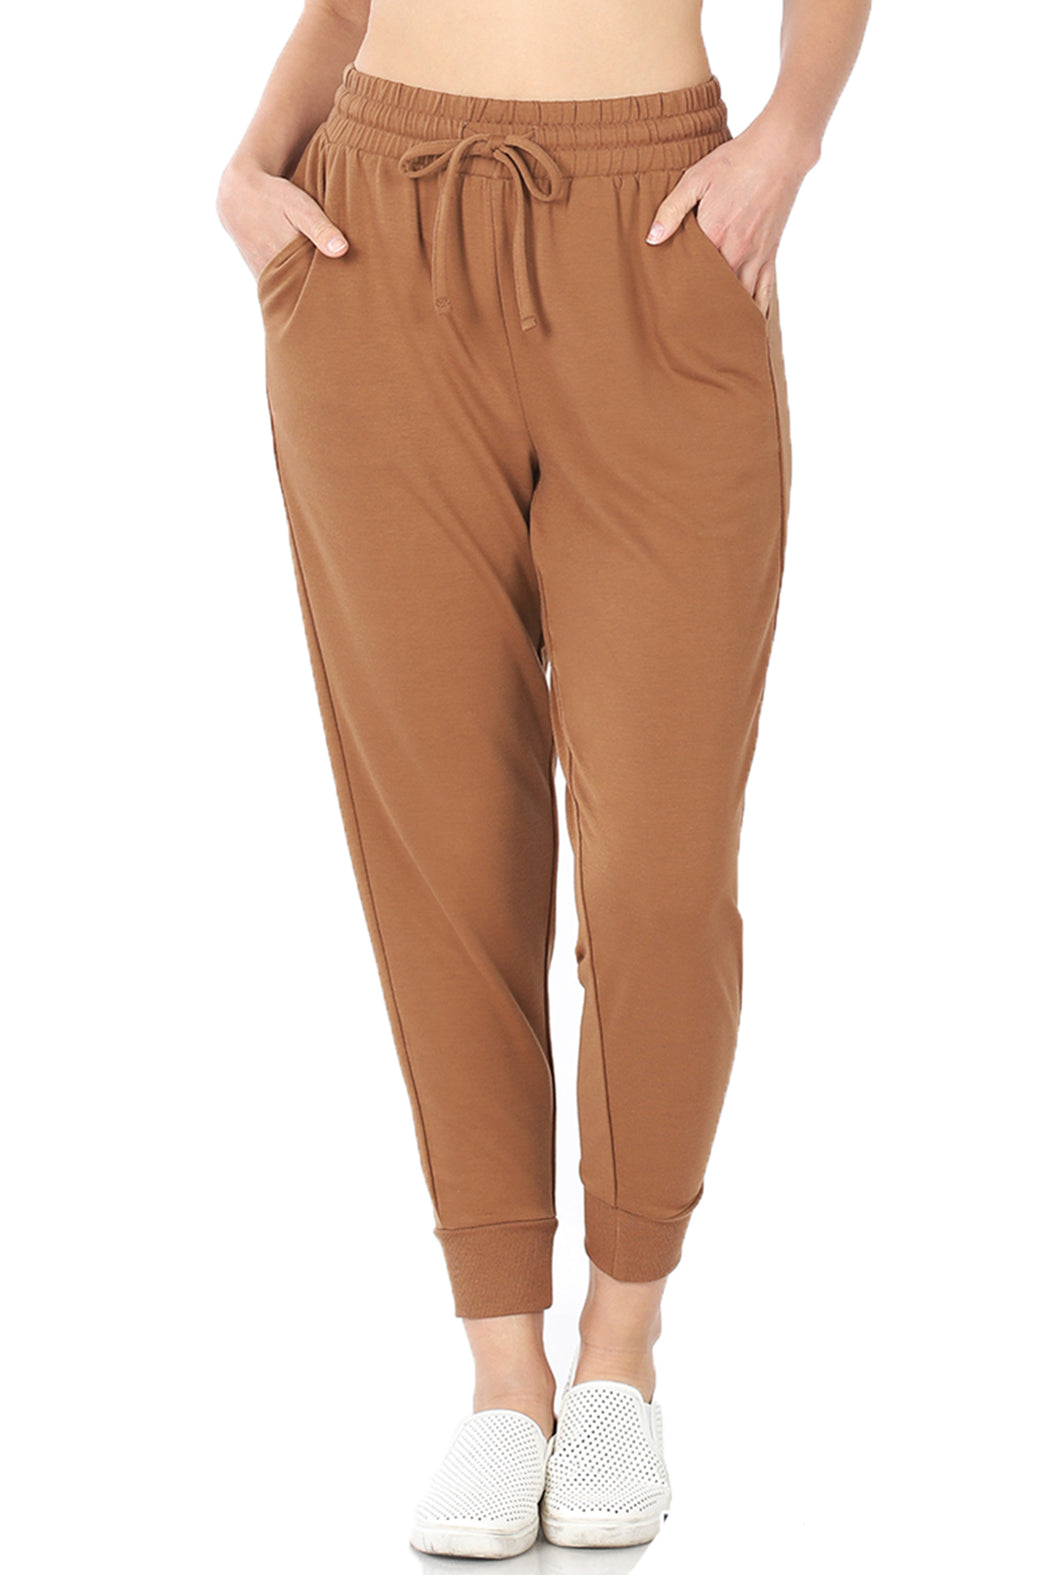 Women's French Terry Jogger Sweatpants with Pockets